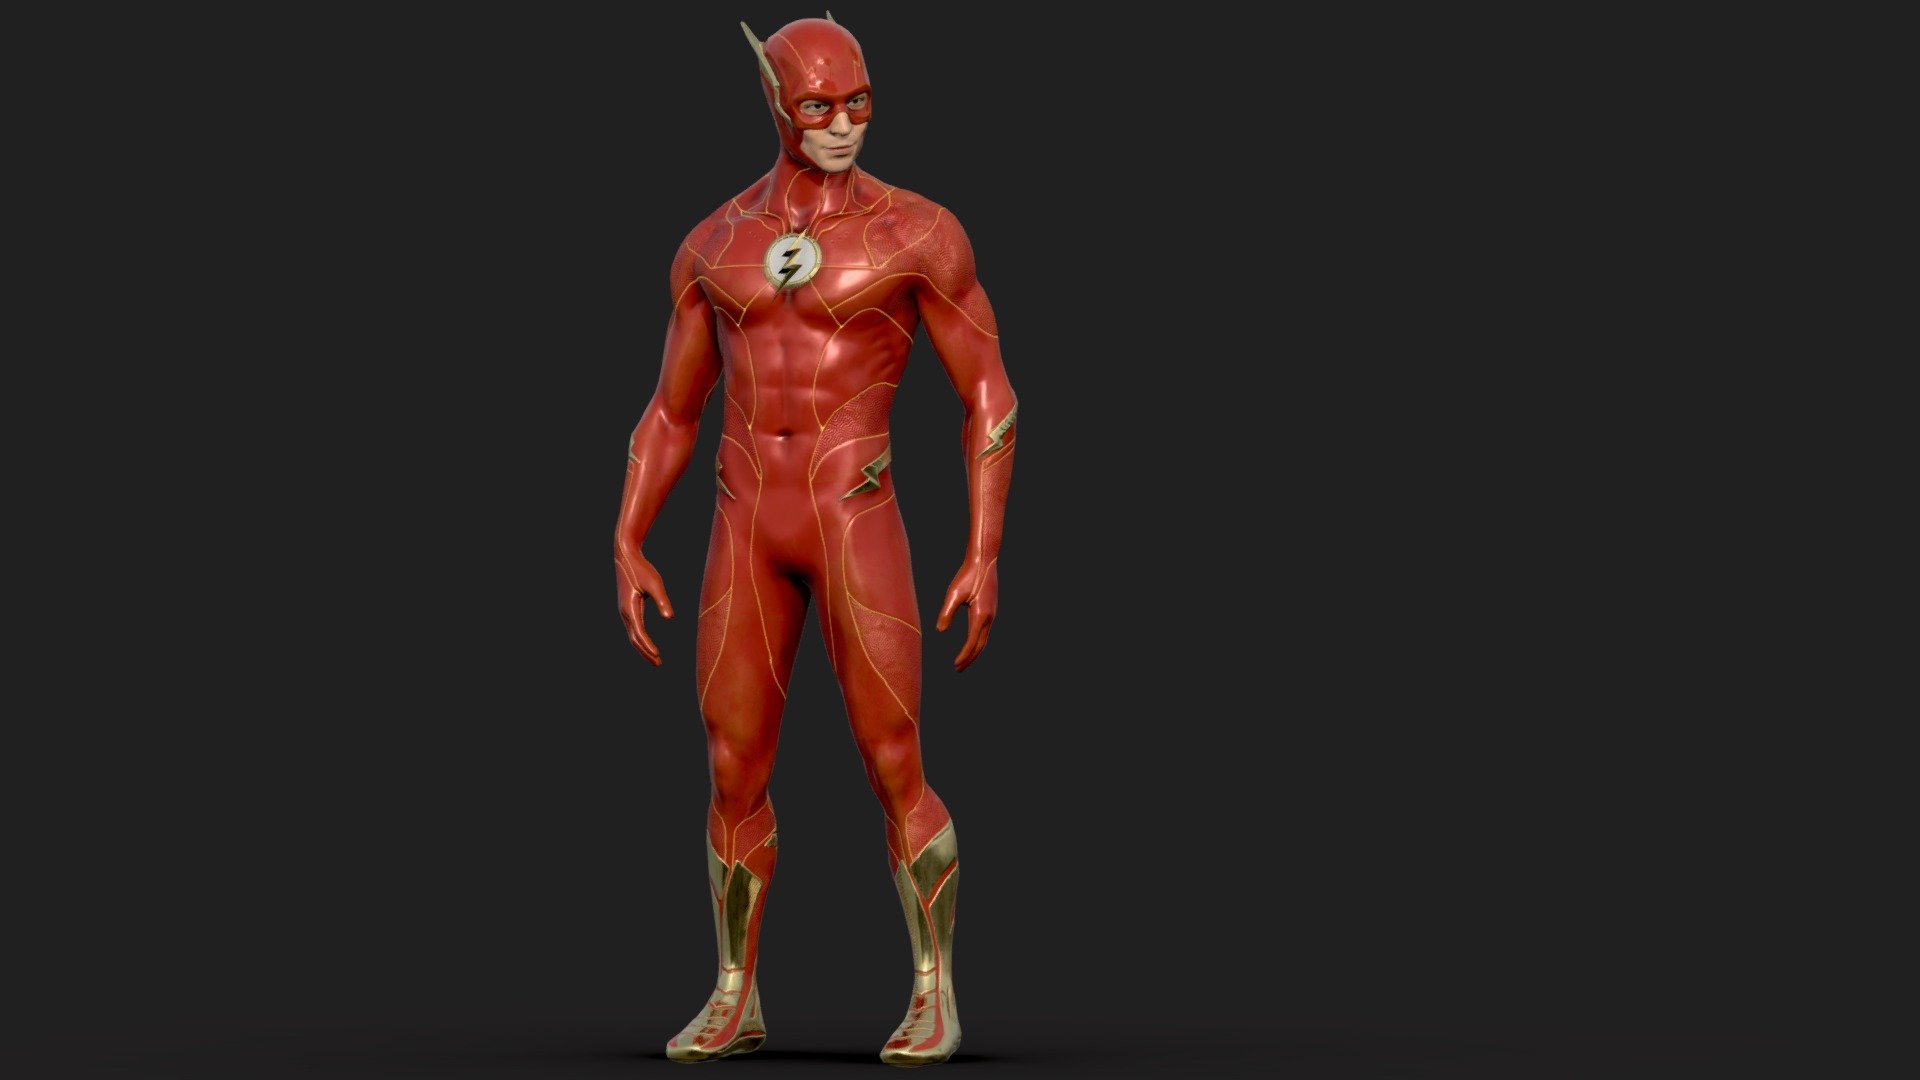 The Flash 2023
3d model lowpoly rigged
Sell On https://shorturl.at/nFQZ6 - The Flash Rigged - Buy Royalty Free 3D model by gatdesigner 3d model